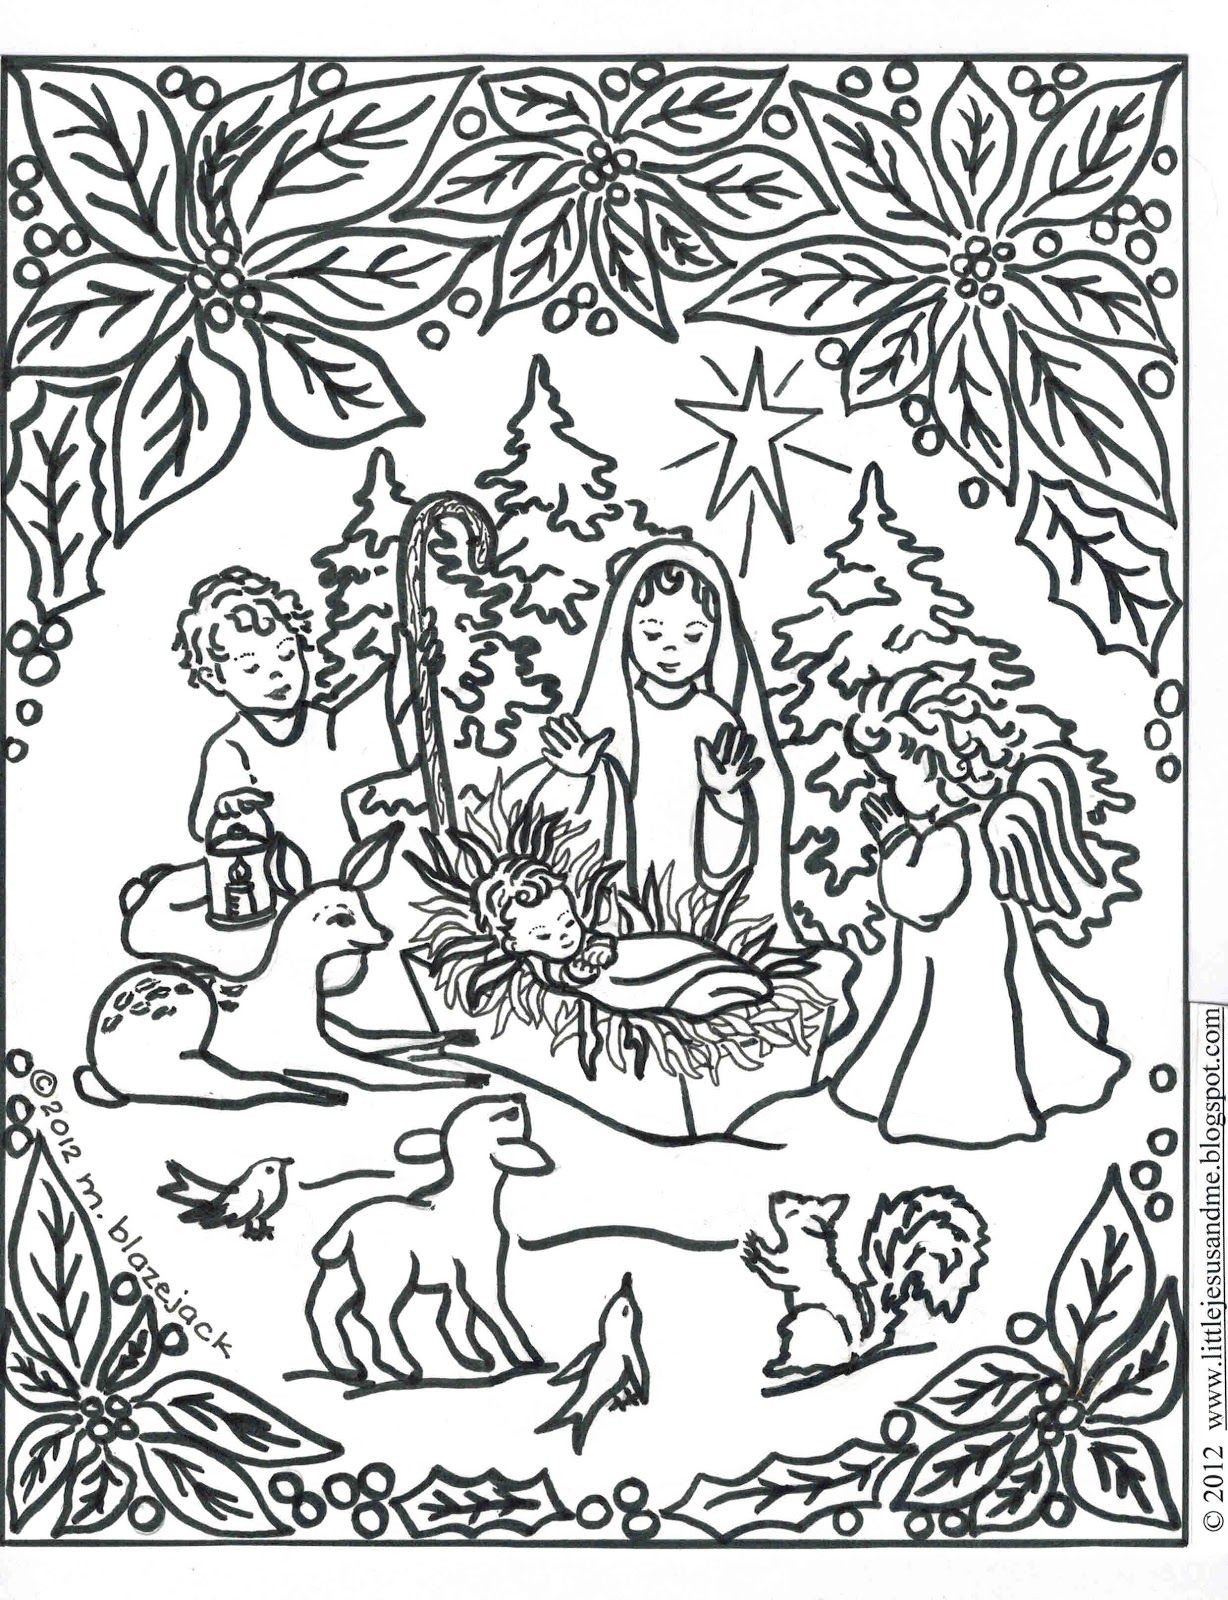 Catholic Adult Coloring Book
 Christian Adult Coloring Pages at GetColorings